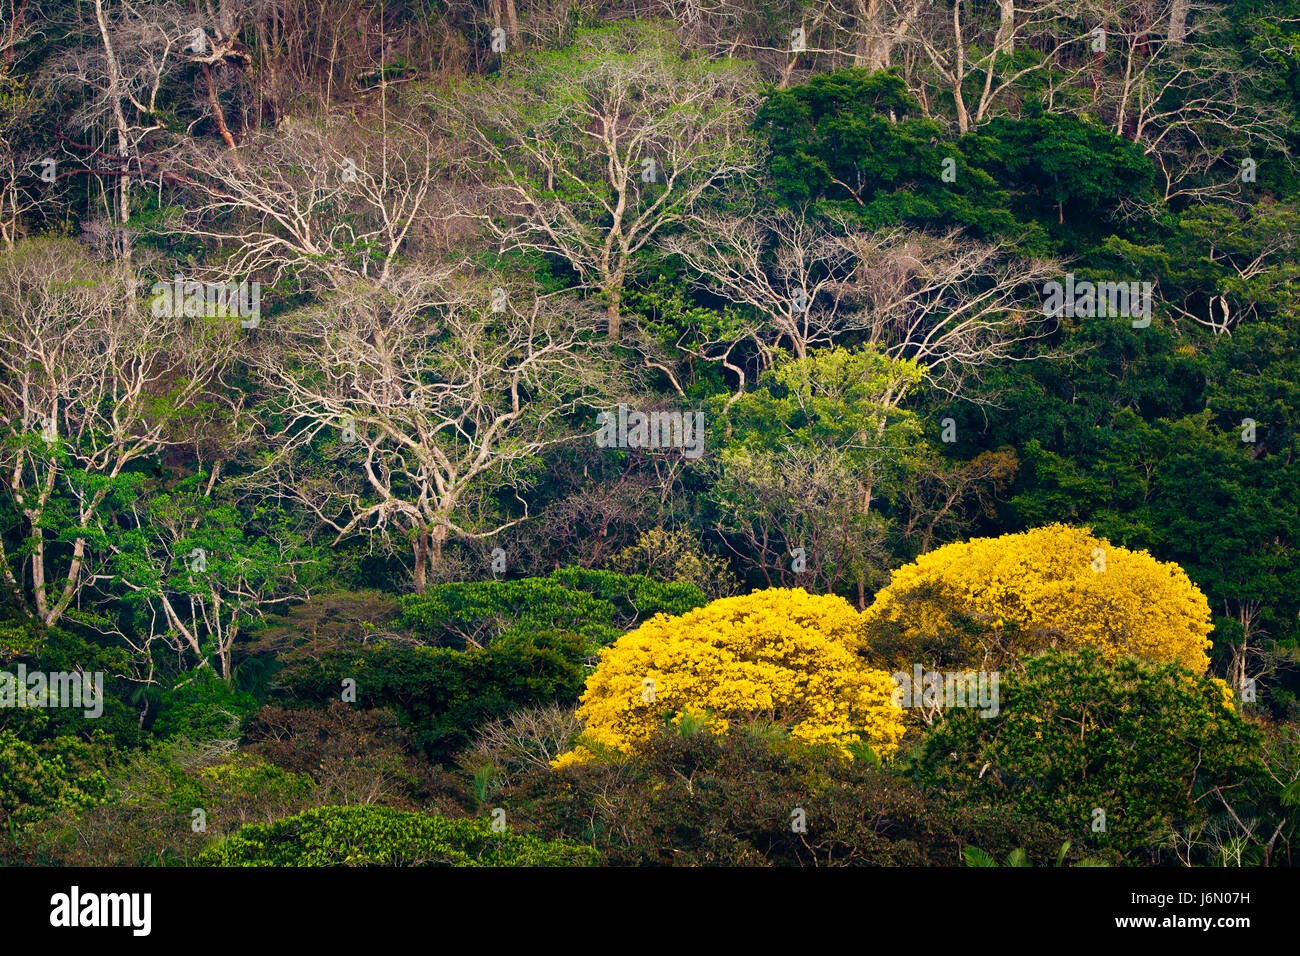 Rainforest beside Rio Chagres in Soberania National Park, Republic of Panama. The yellow trees are flowering Gold Trees (Guayacanes). Stock Photo